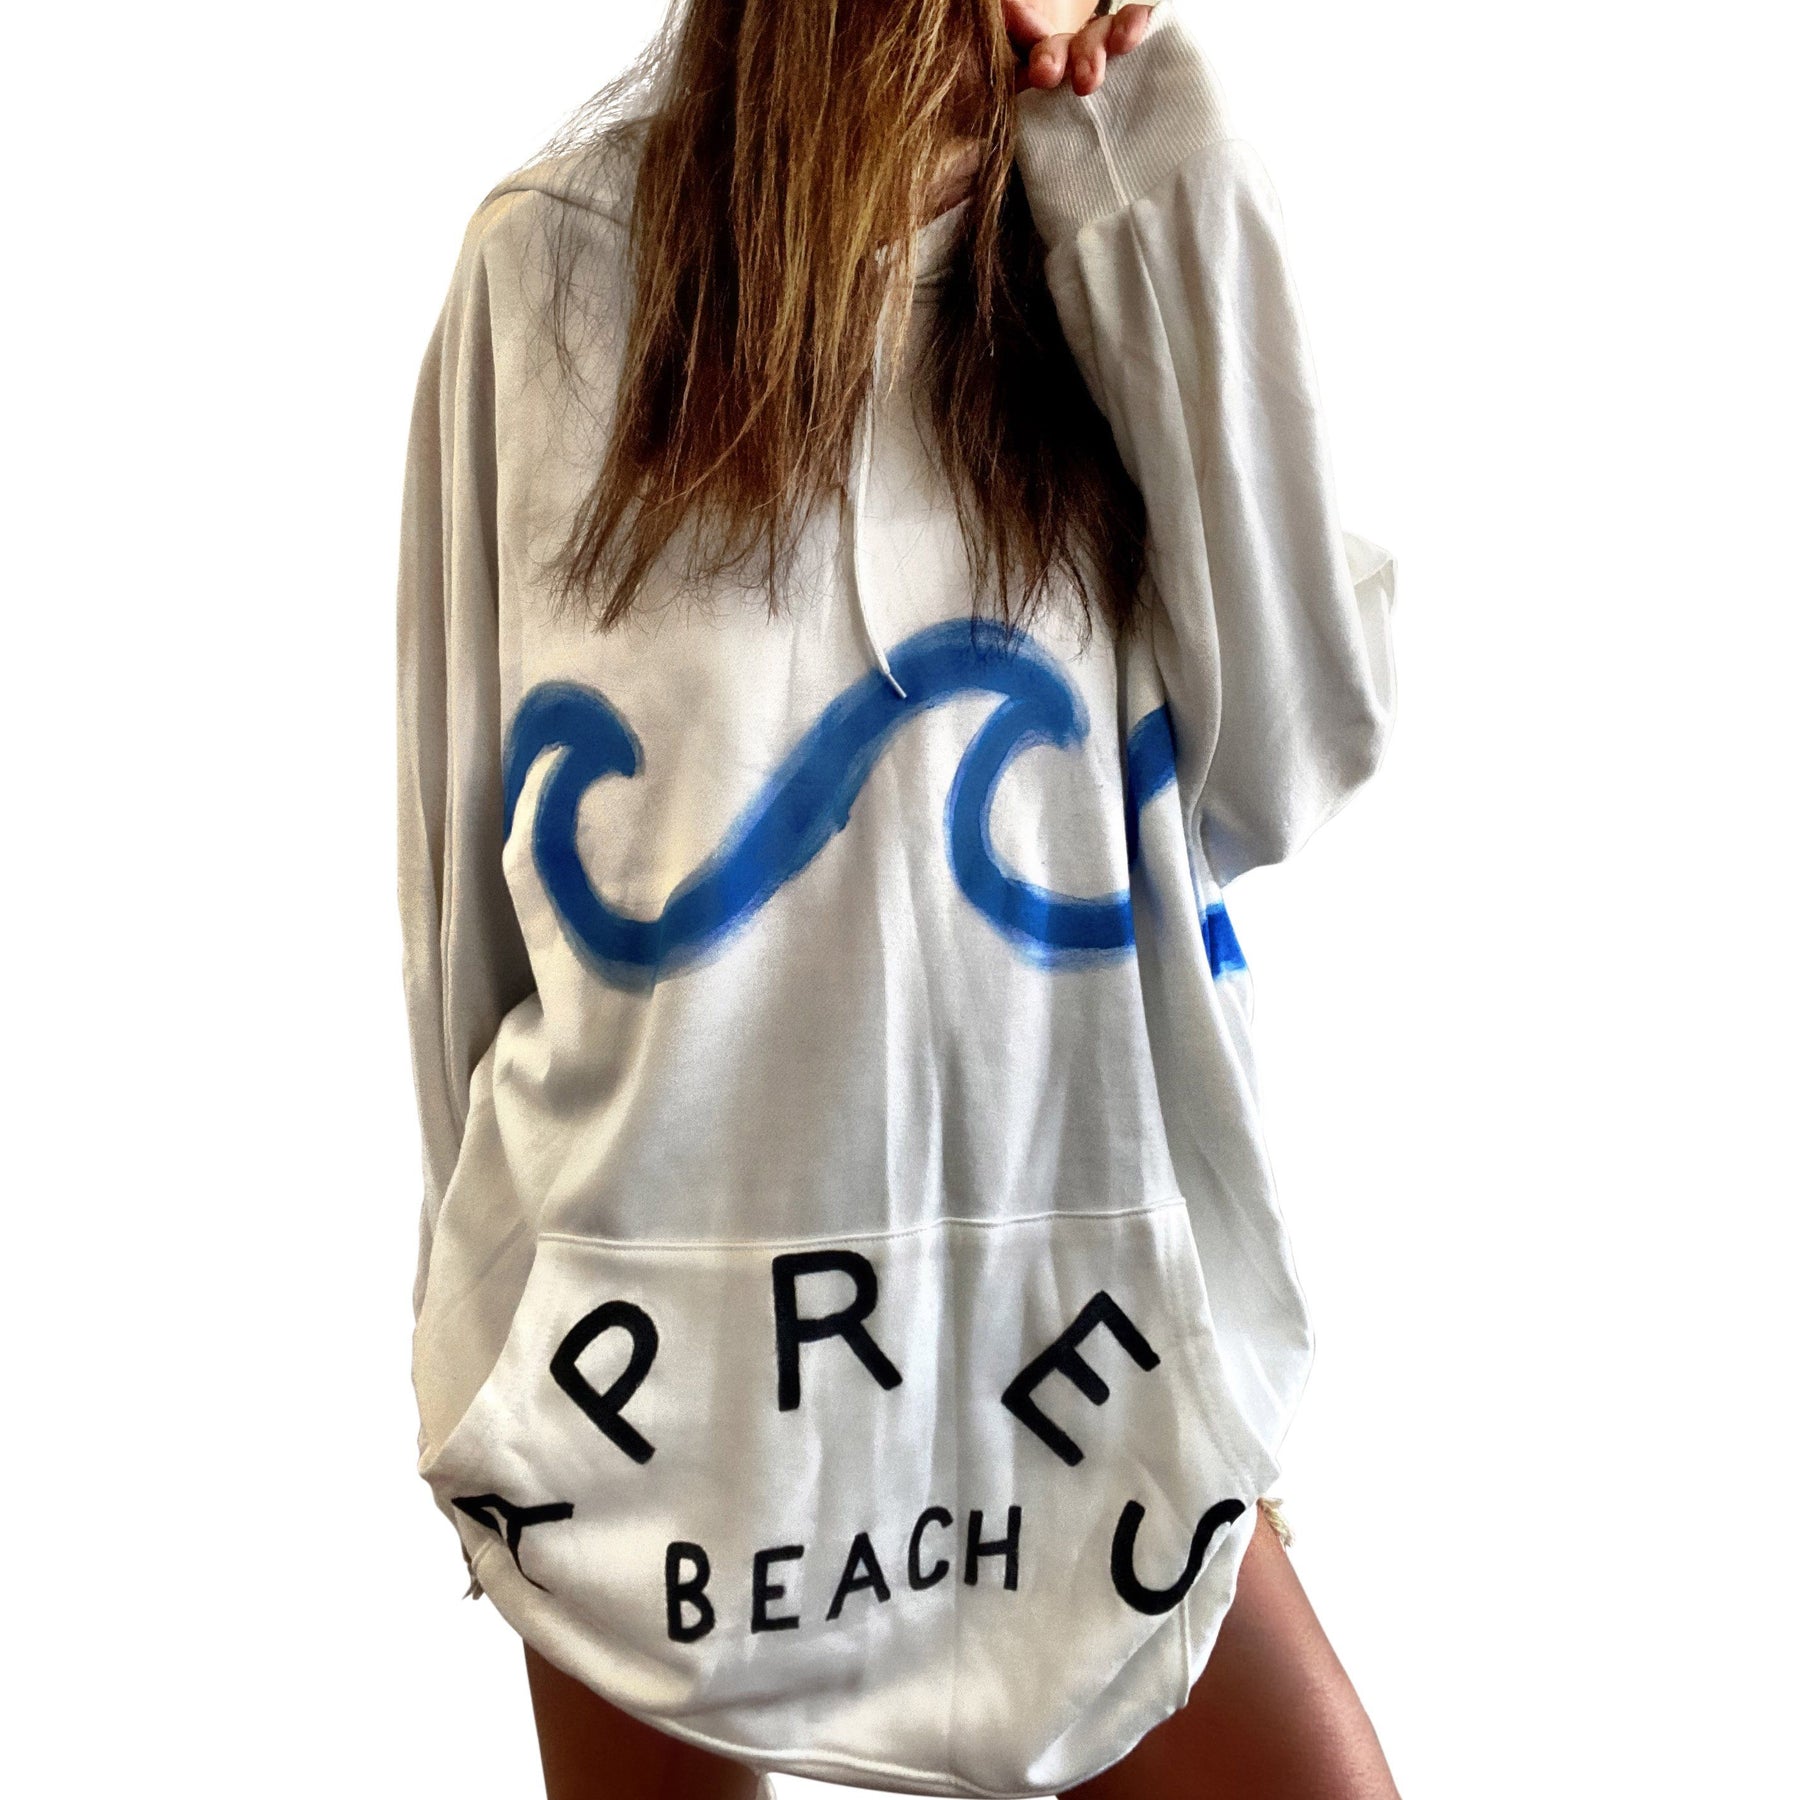 Oversized white sweatshirt dress. Blue wave painted along entire sweatshirt, on chest area, with APRES BEACH painted in black on front pocket. Signed @wrenandglory.